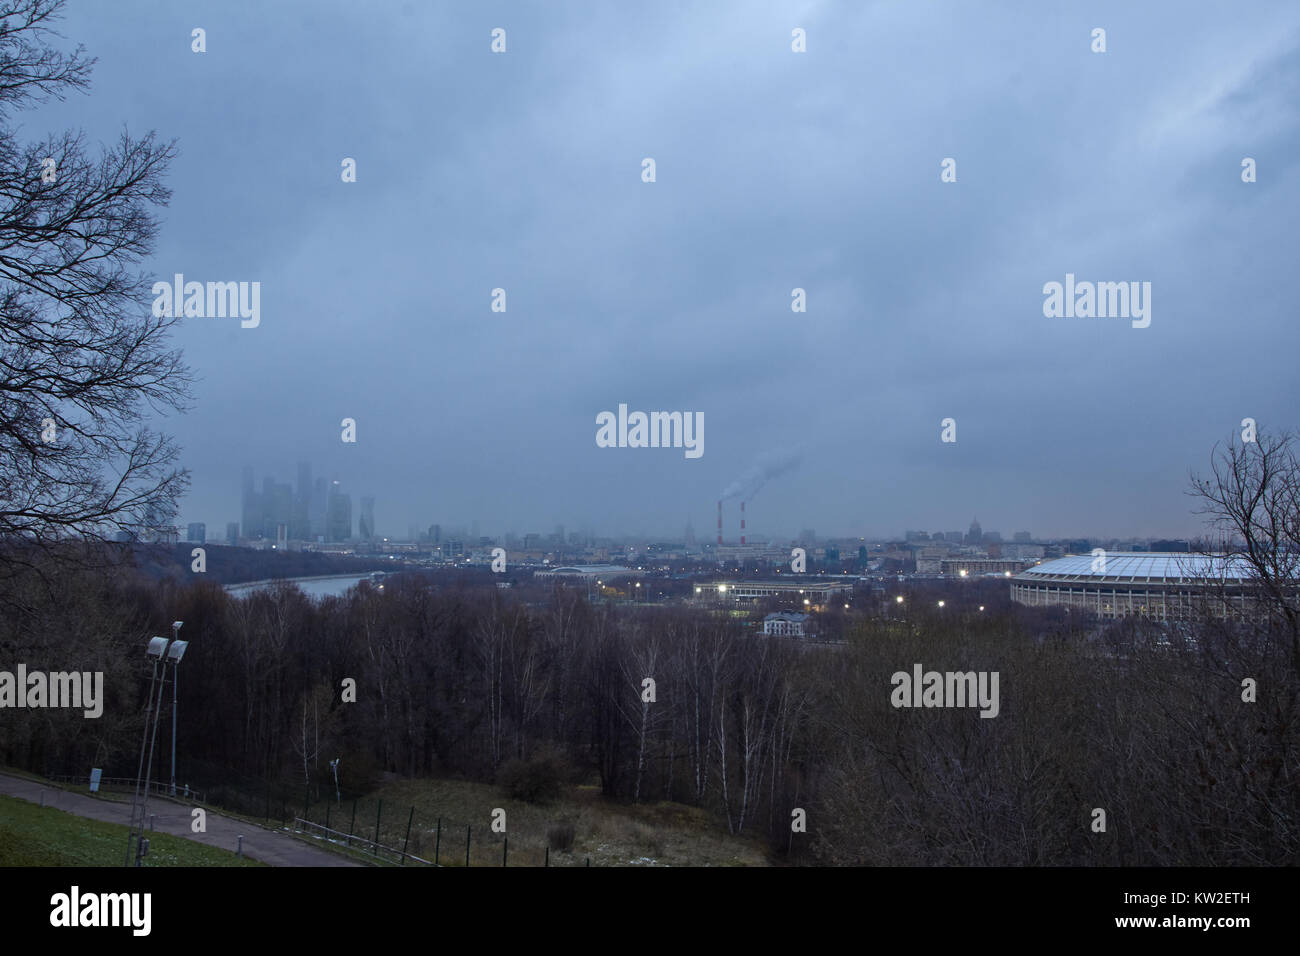 Cityscape at dusk with gloomy clouds at background Stock Photo